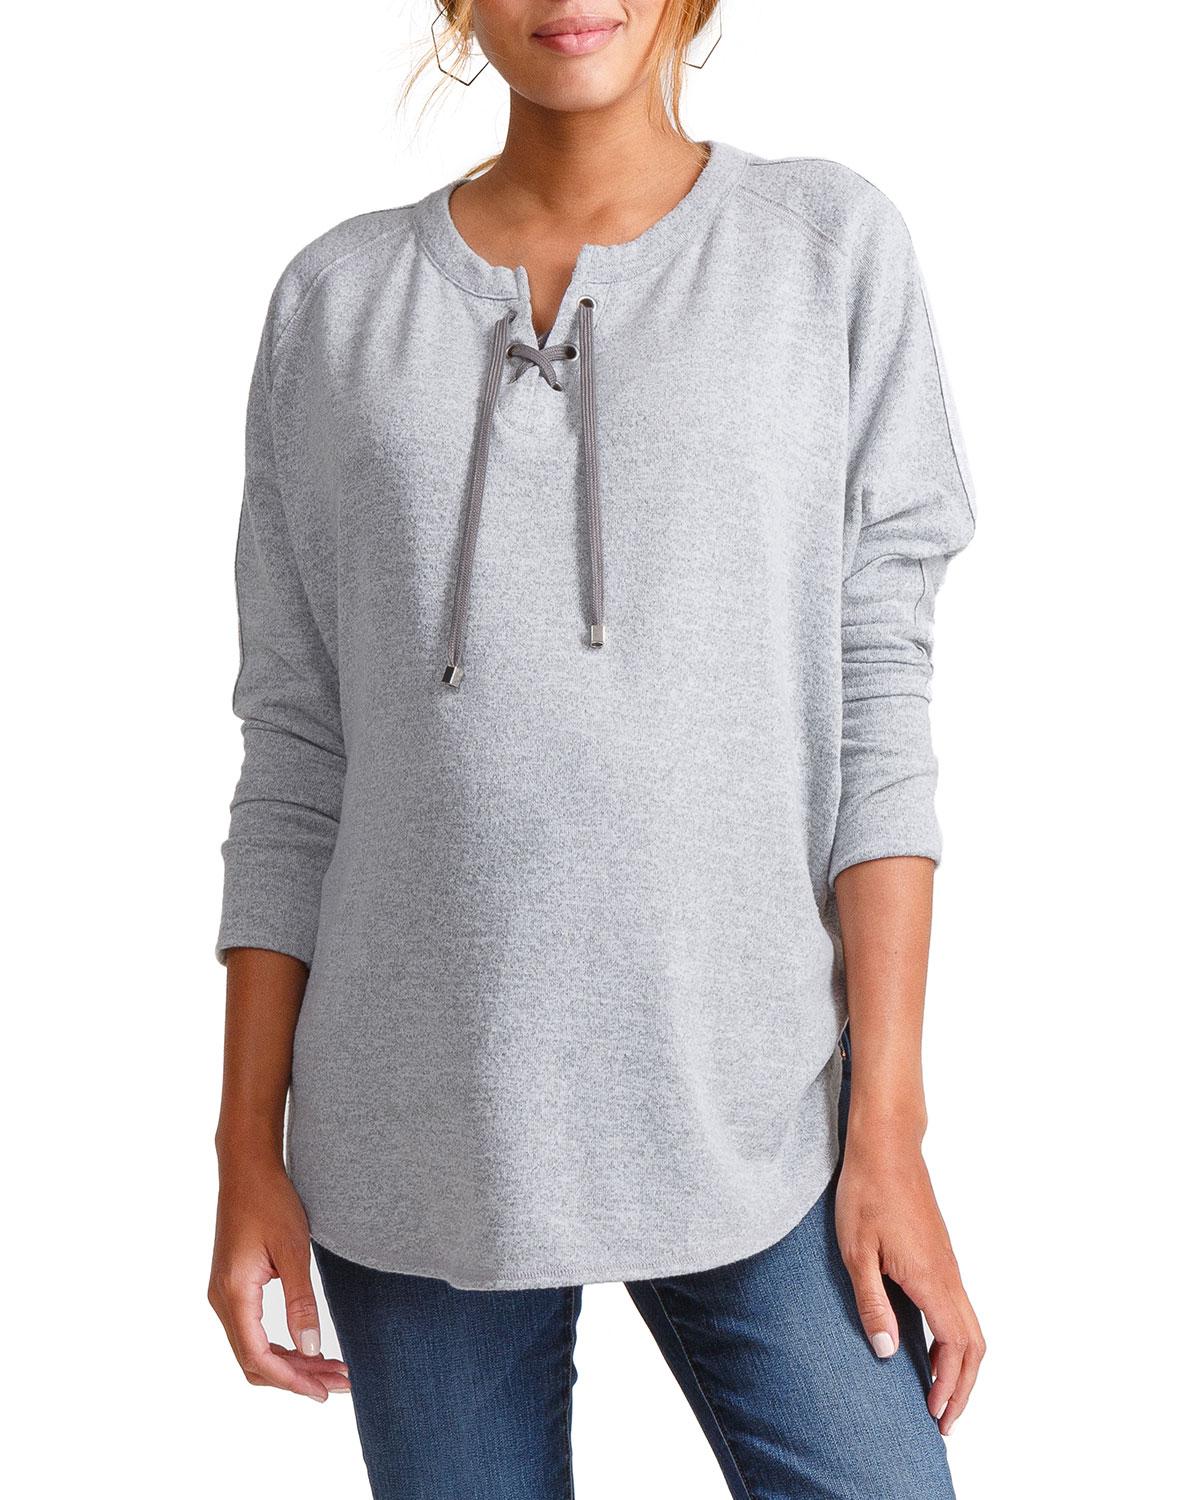 Ingrid & Isabel Maternity Lace-up Cocoon Top in Heather Grey (Gray) - Lyst